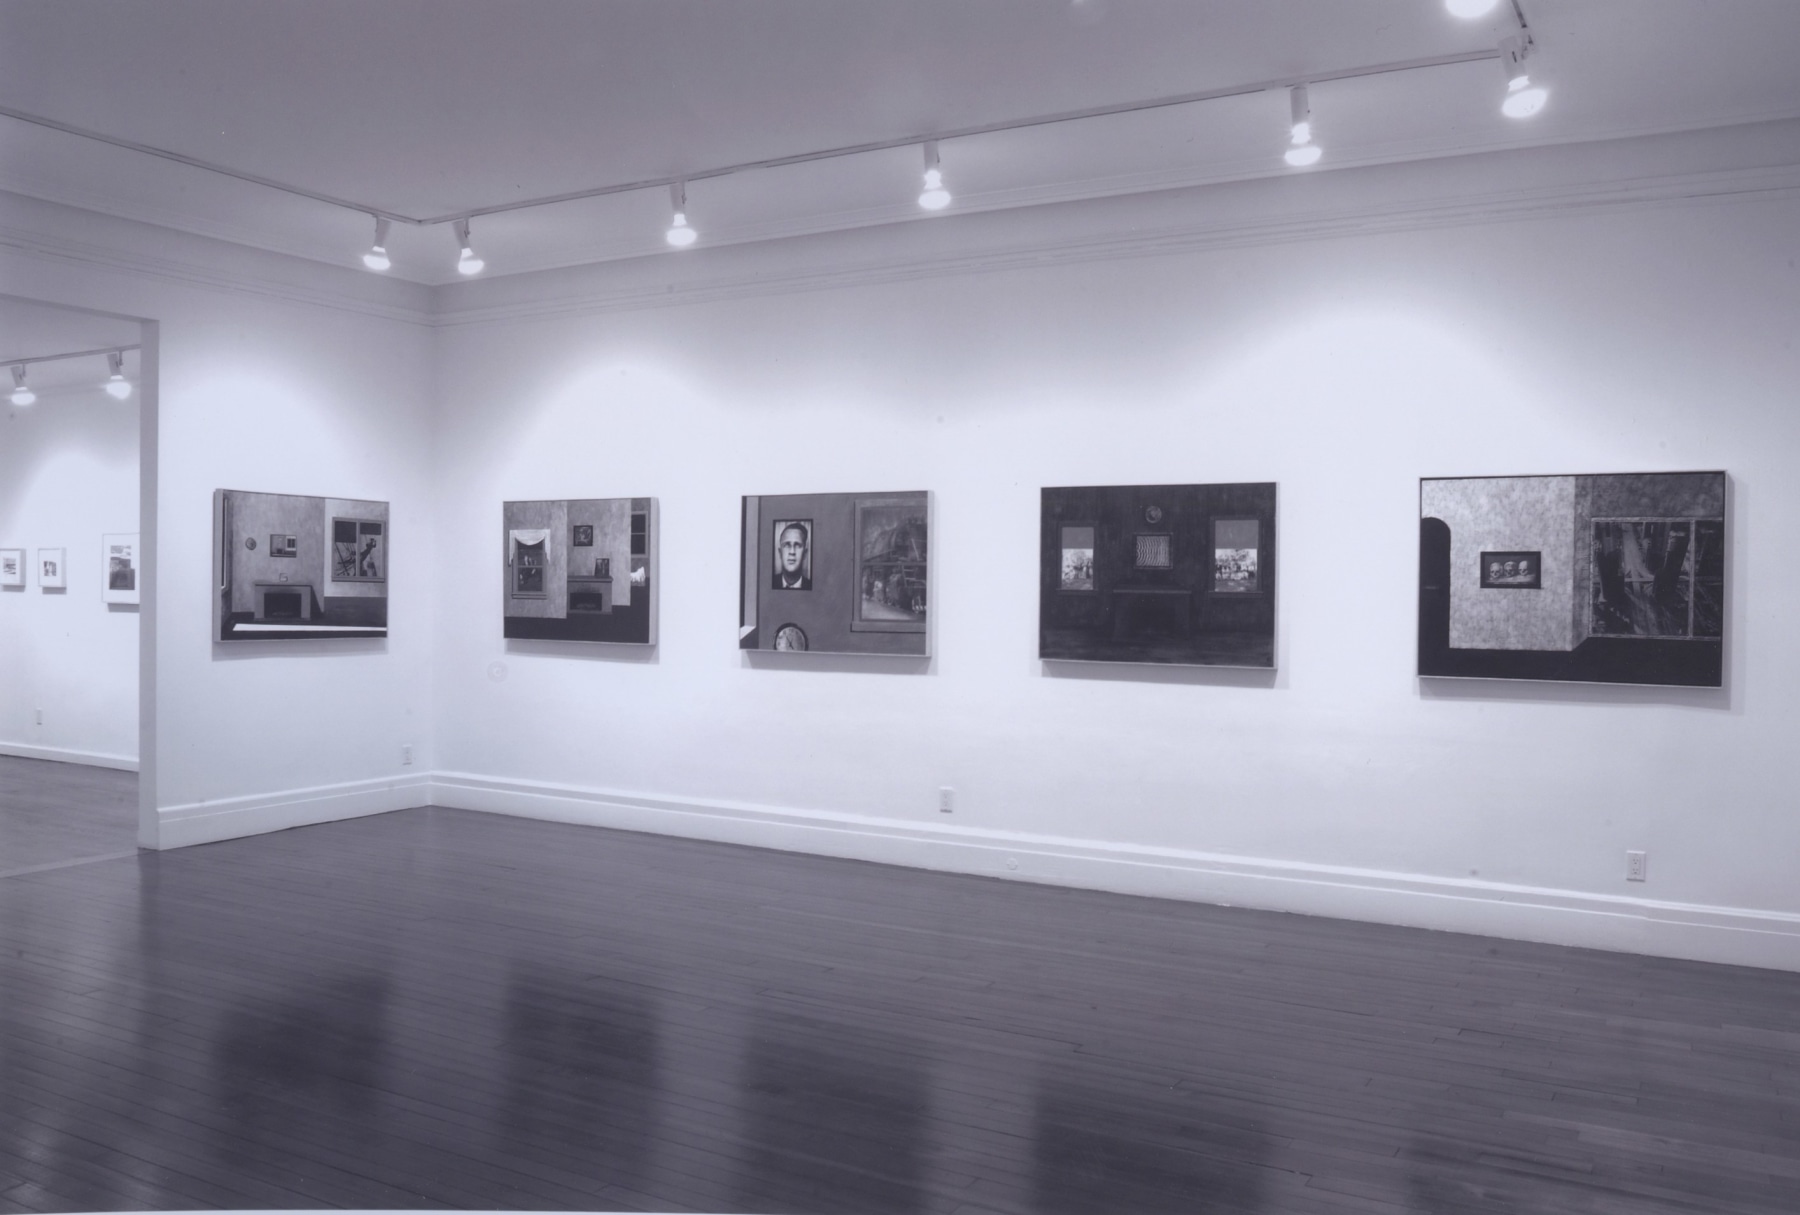 Installation view, Robert Morris: Waxing Time, Waning Light: New Paintings, 18 EAST 77